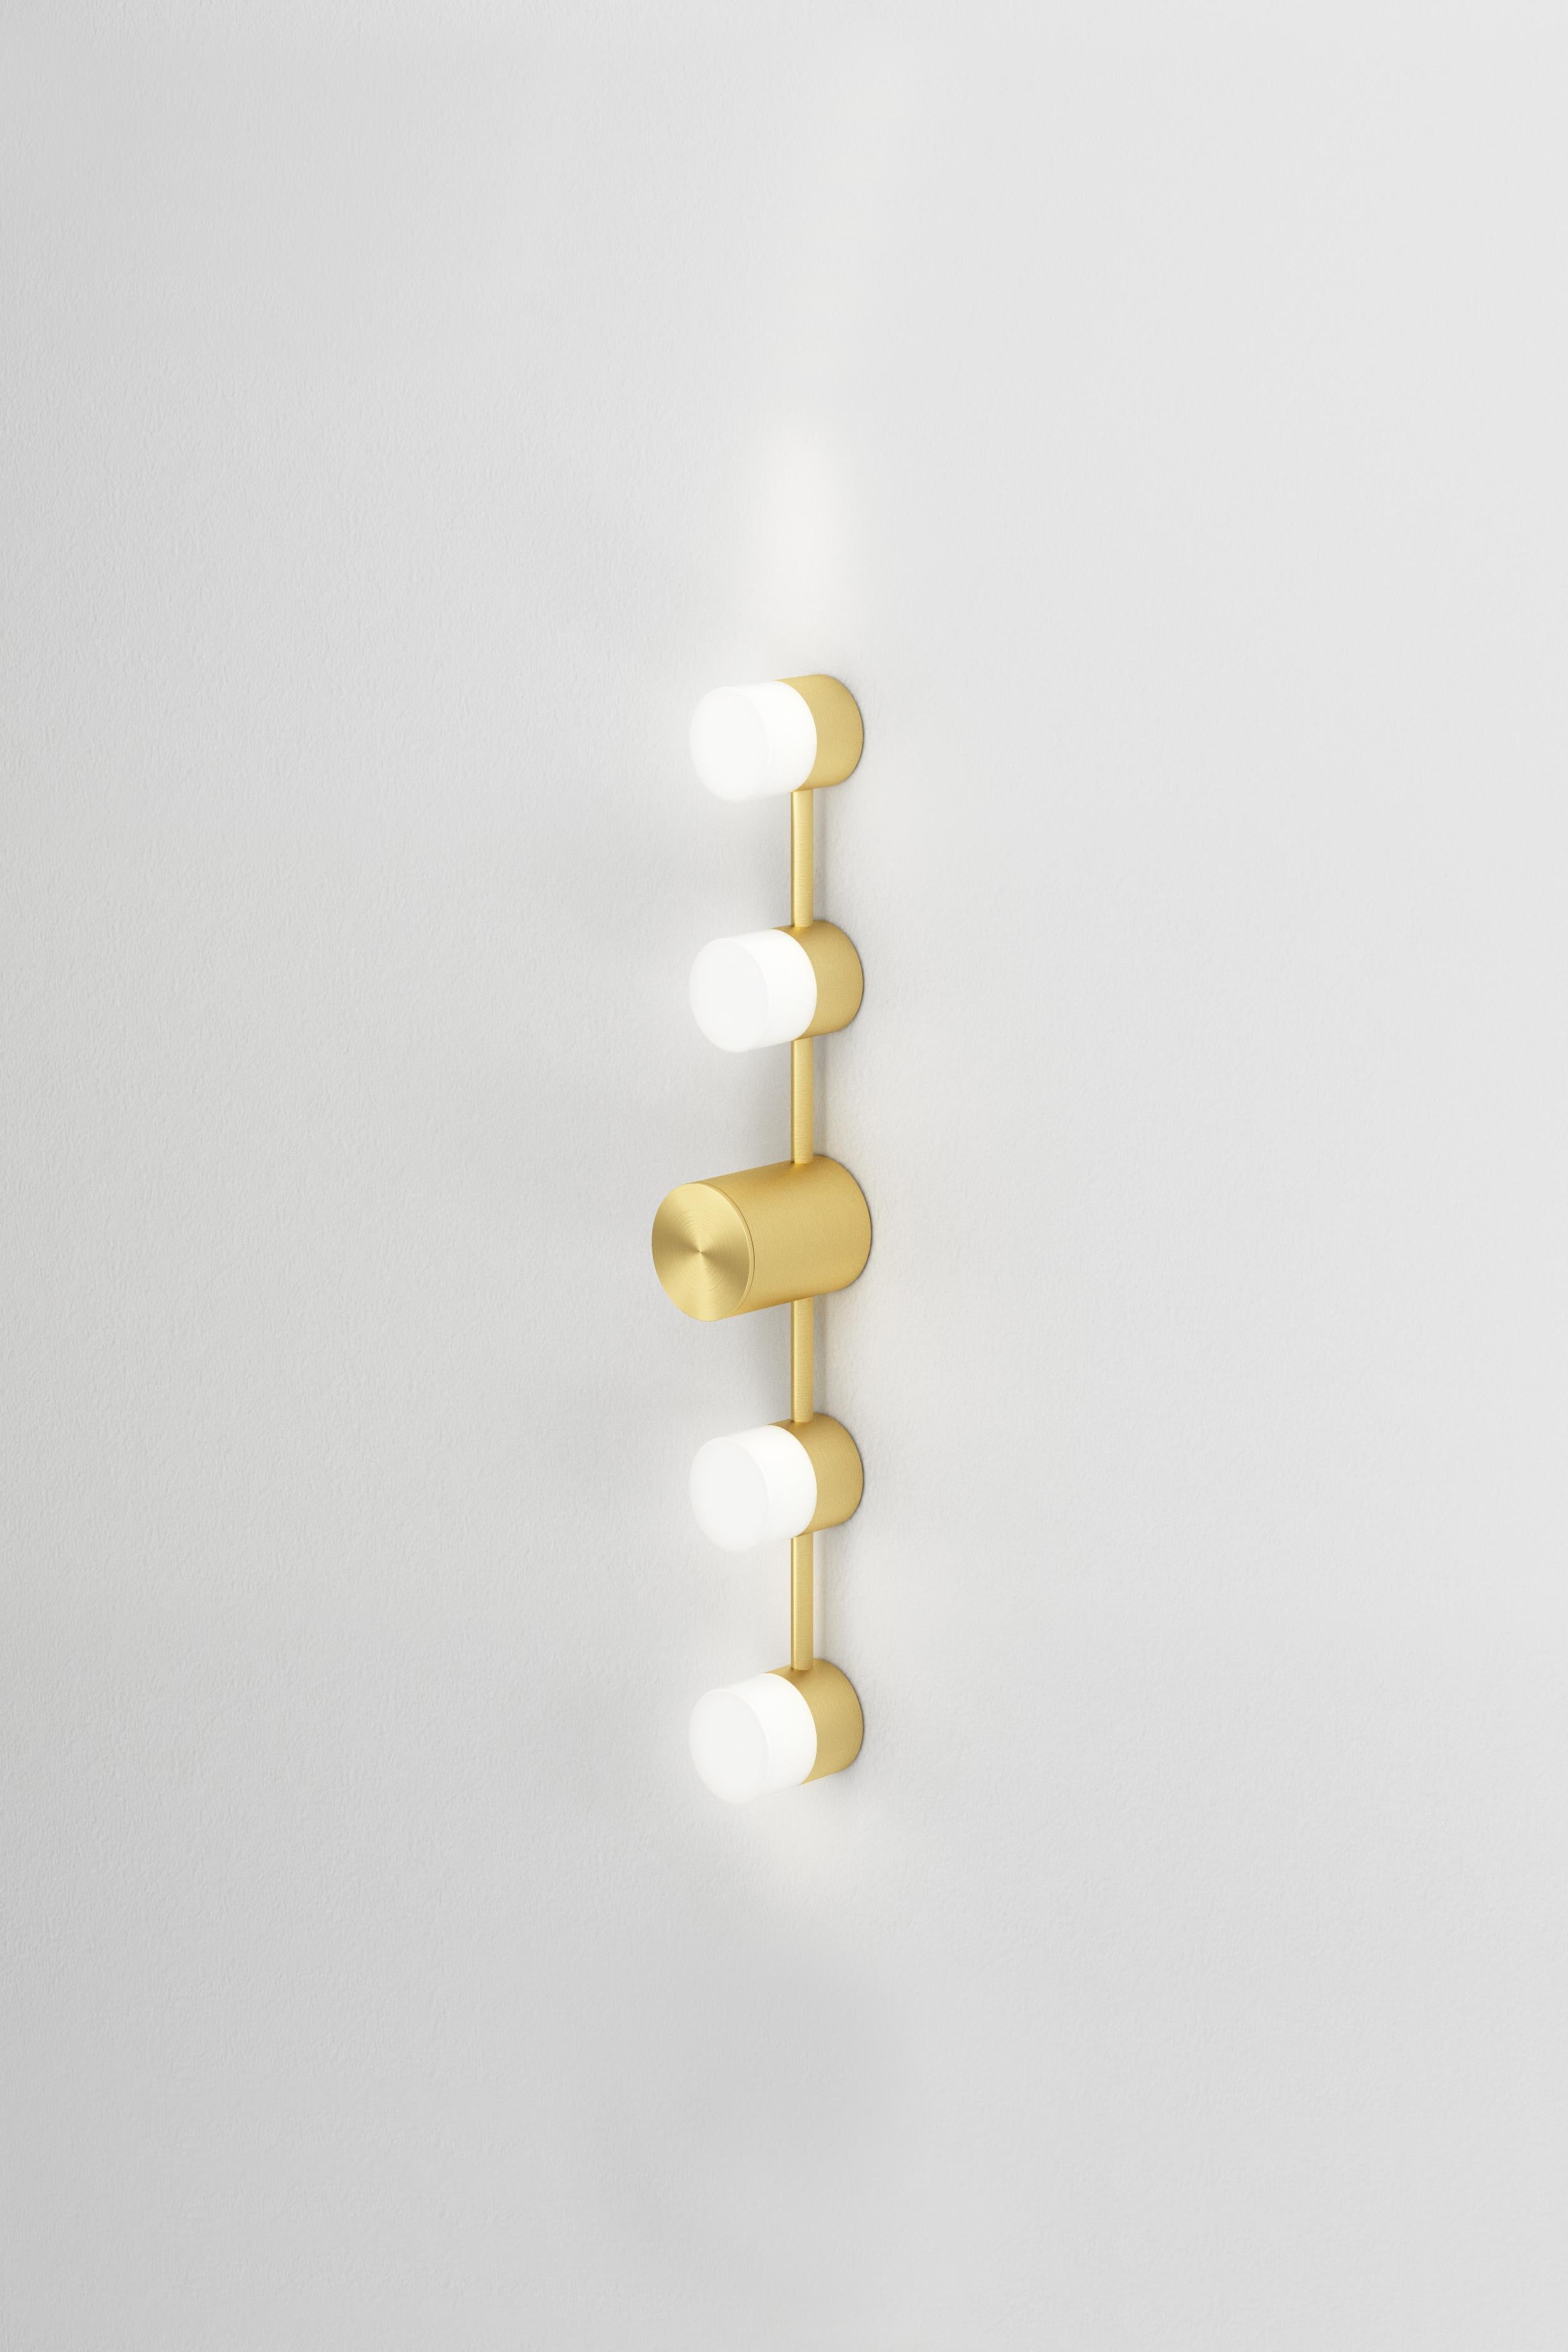 Post-Modern Ip Backstage L4 Satin Brass Wall Light by Emilie Cathelineau For Sale